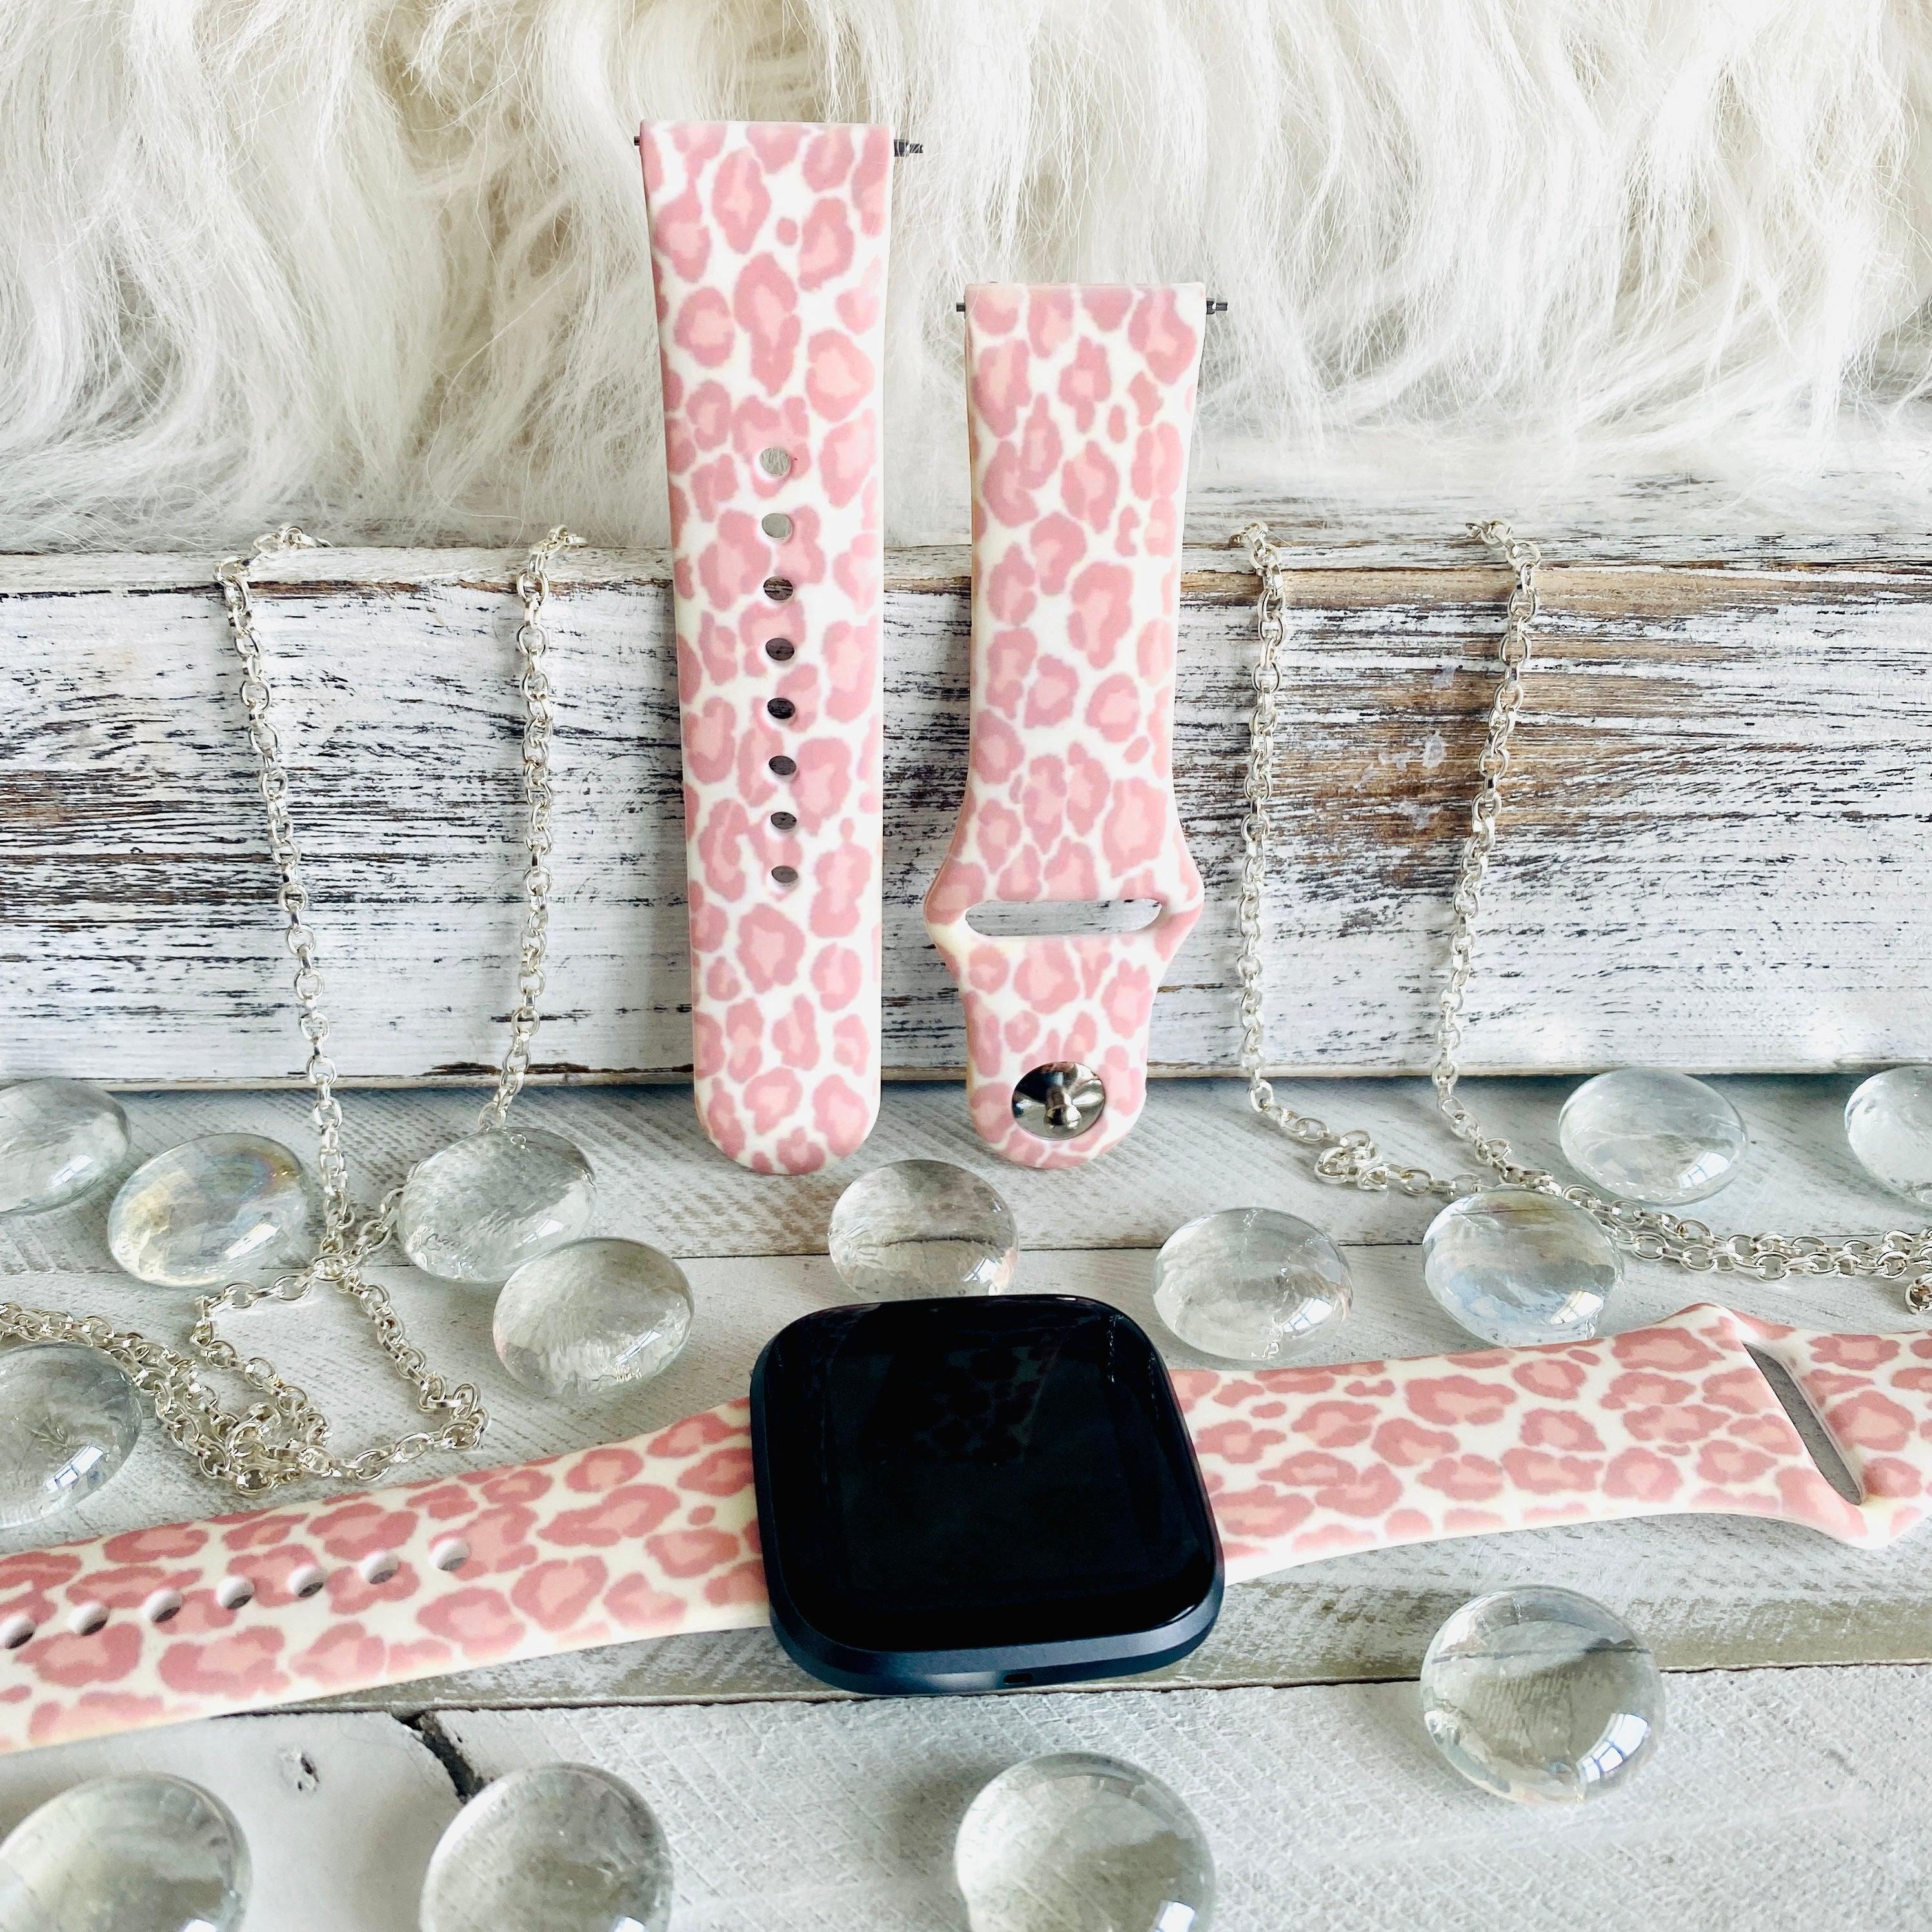 Blush Leopard Print Silicone Band For Fitbit Versa 1/2 - Fancy Bands 